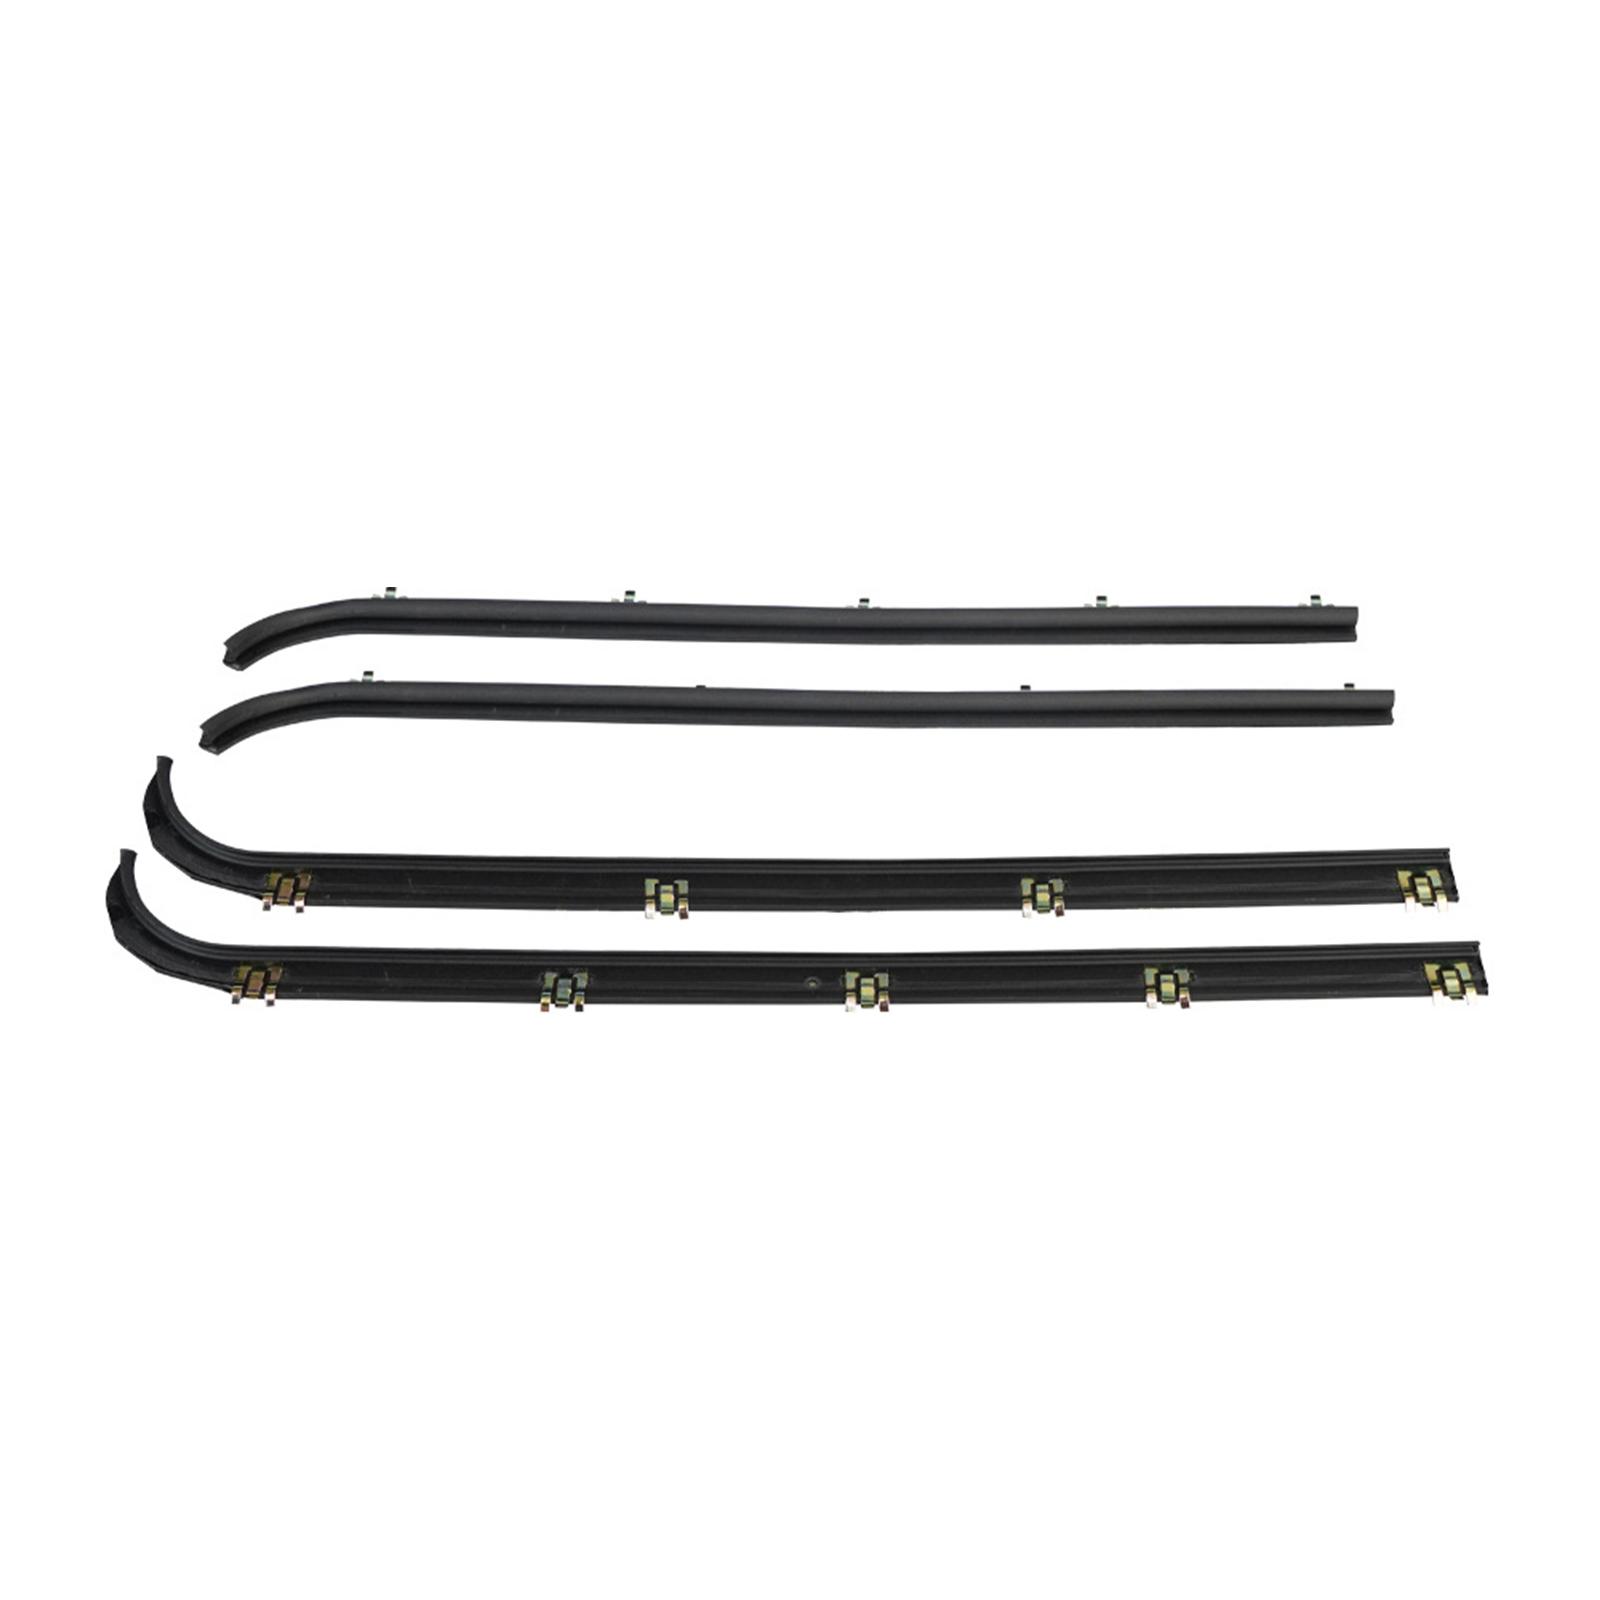 4x Weatherstrip Window Seal E7TZ1521453 Parts for Ford Bronco 1987-1997